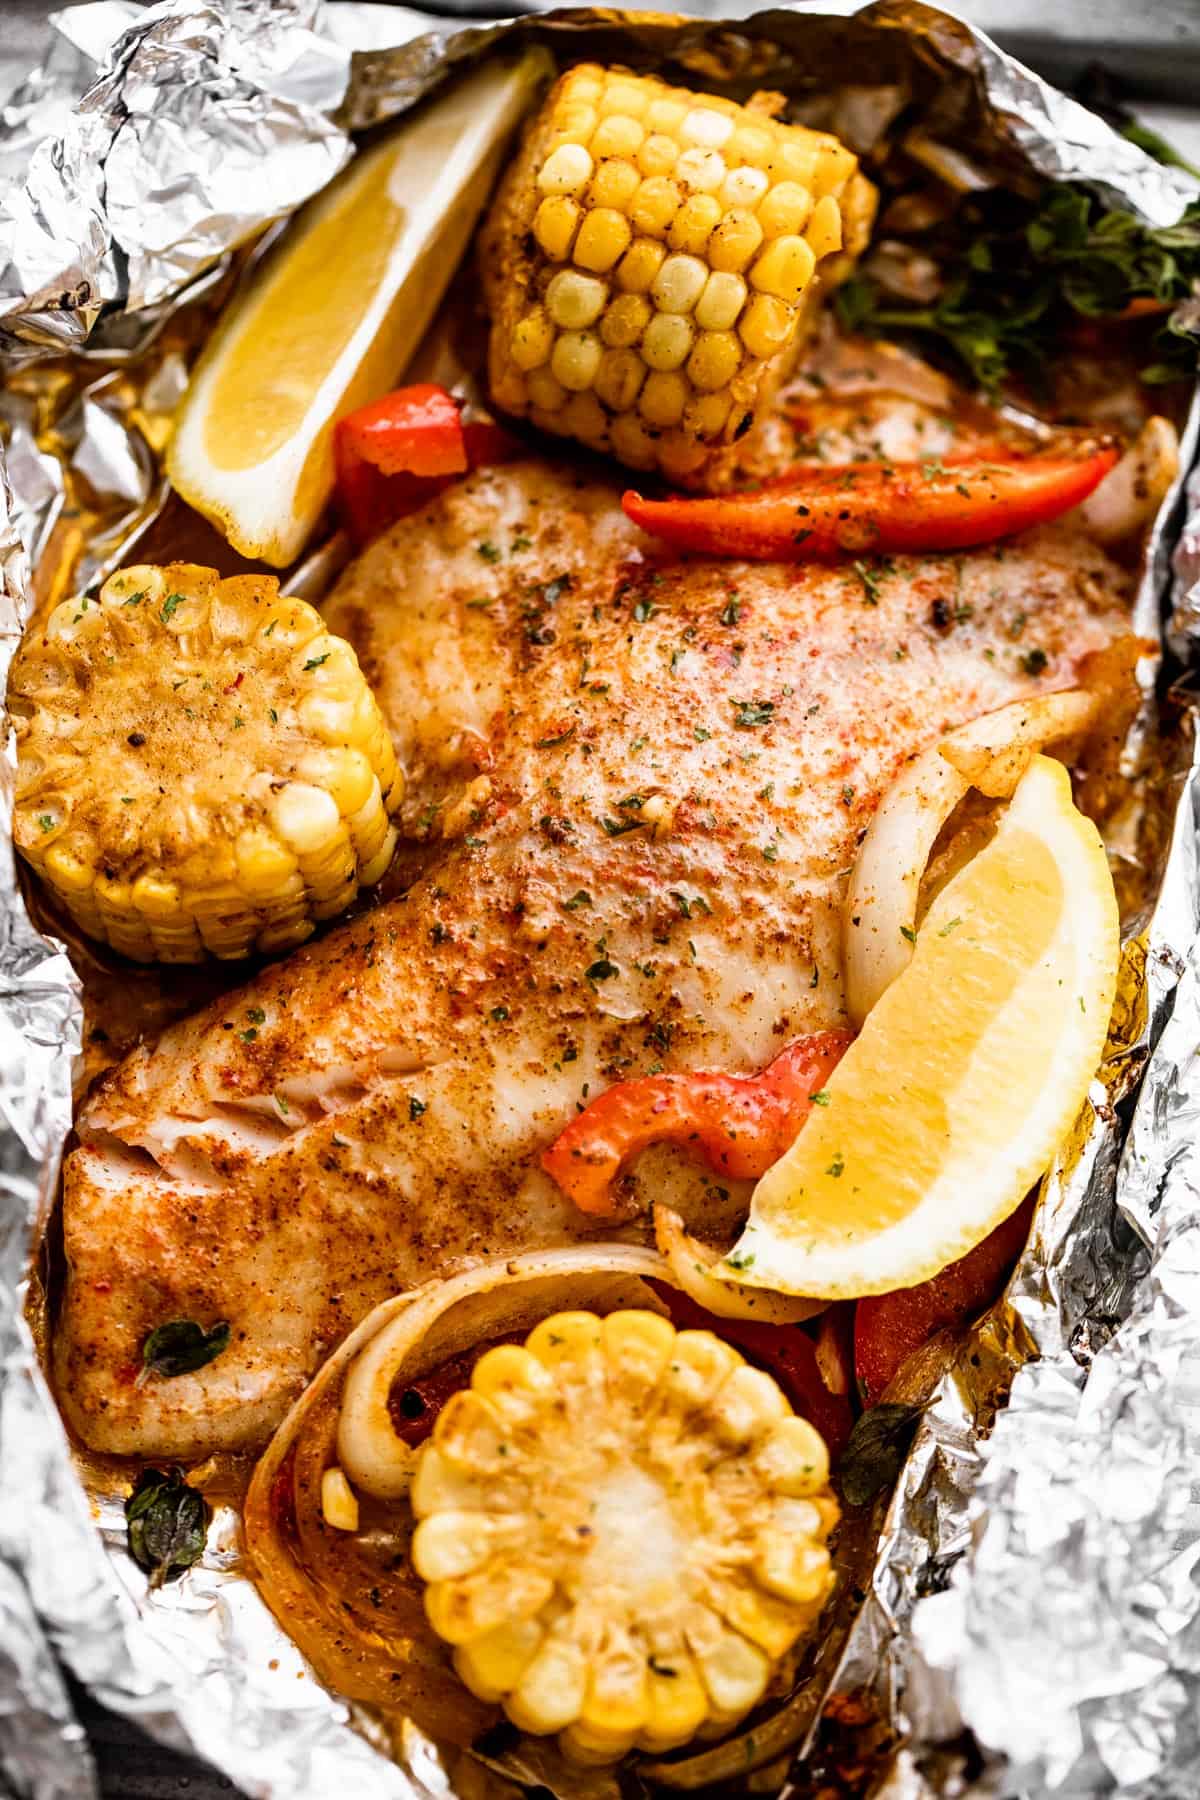 overhead shot of grilled tilapia filet set on a piece of foil and corn on the cob, lemon slices, and veggies arranged around the fish.